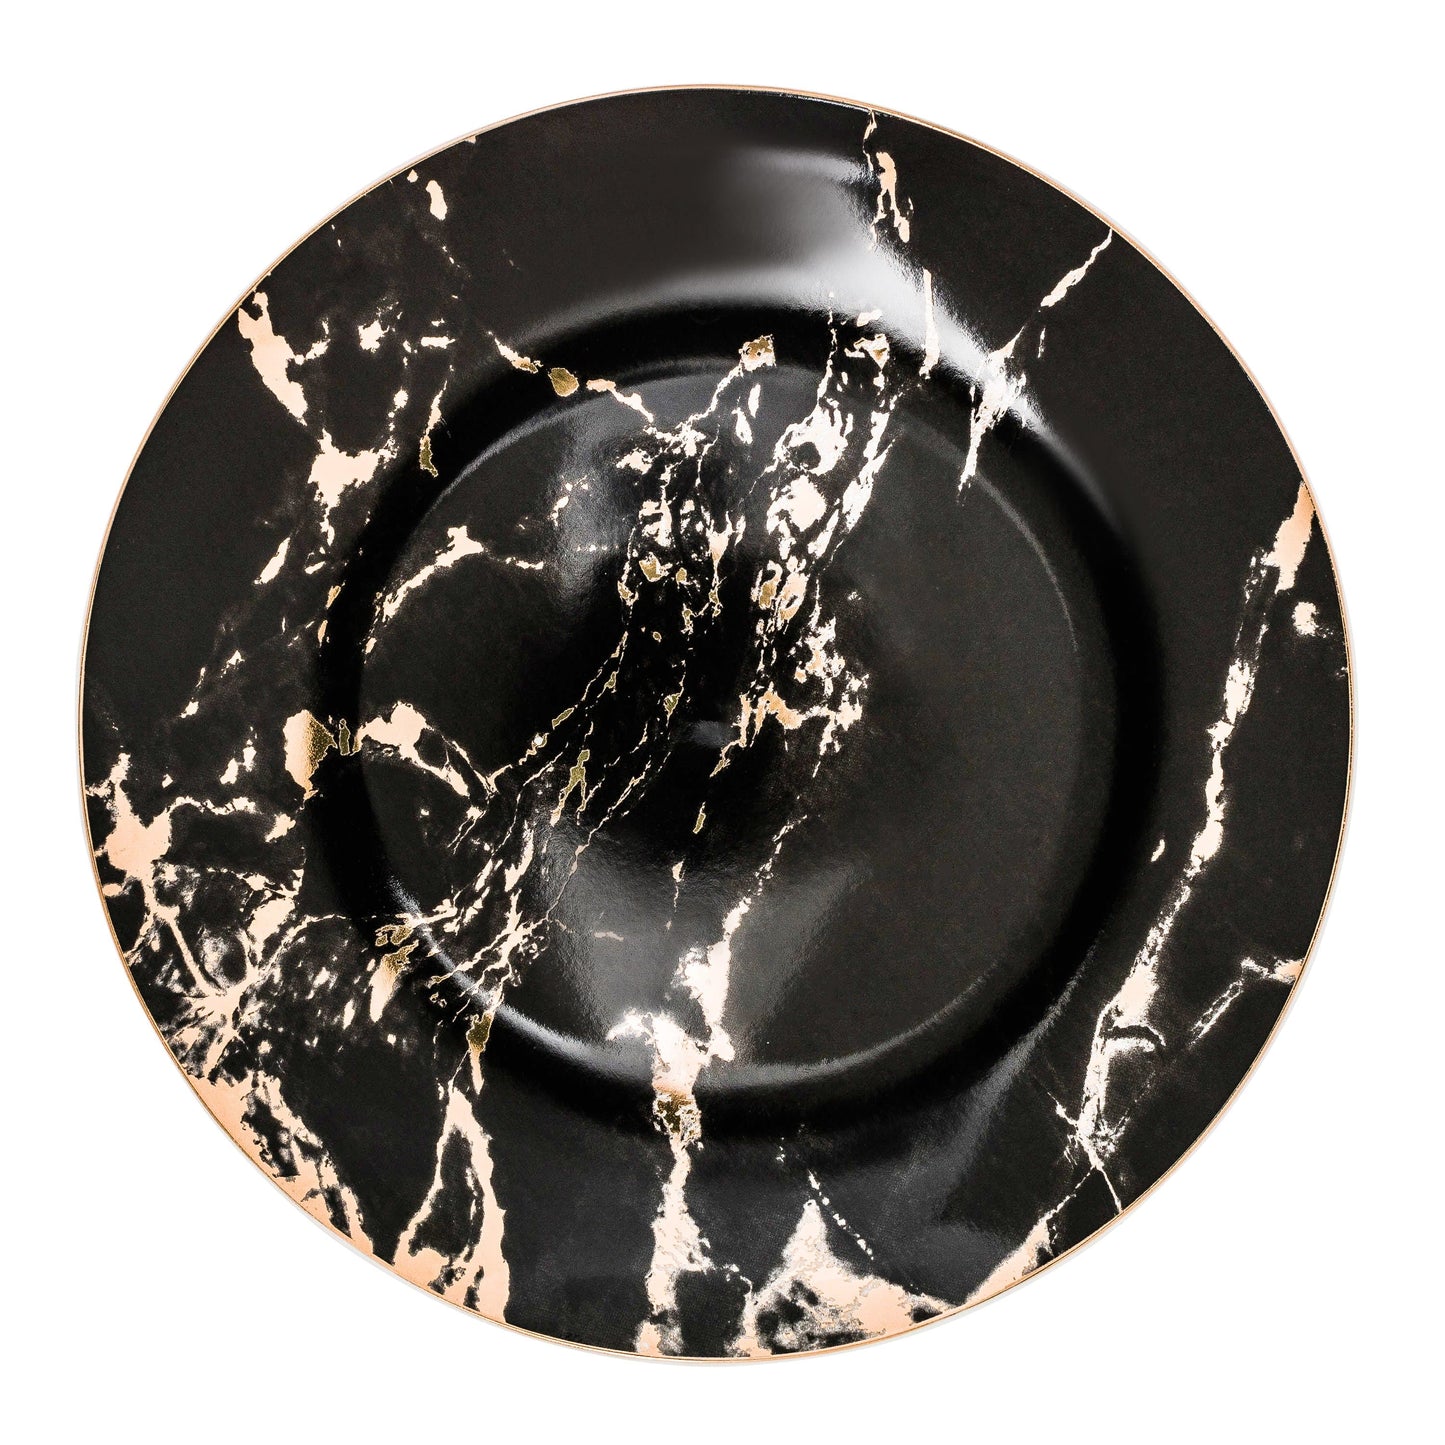 Michaelangelo Plate Collection - Nordic Side - ALL, collection, Dining, Michaelangelo, plate